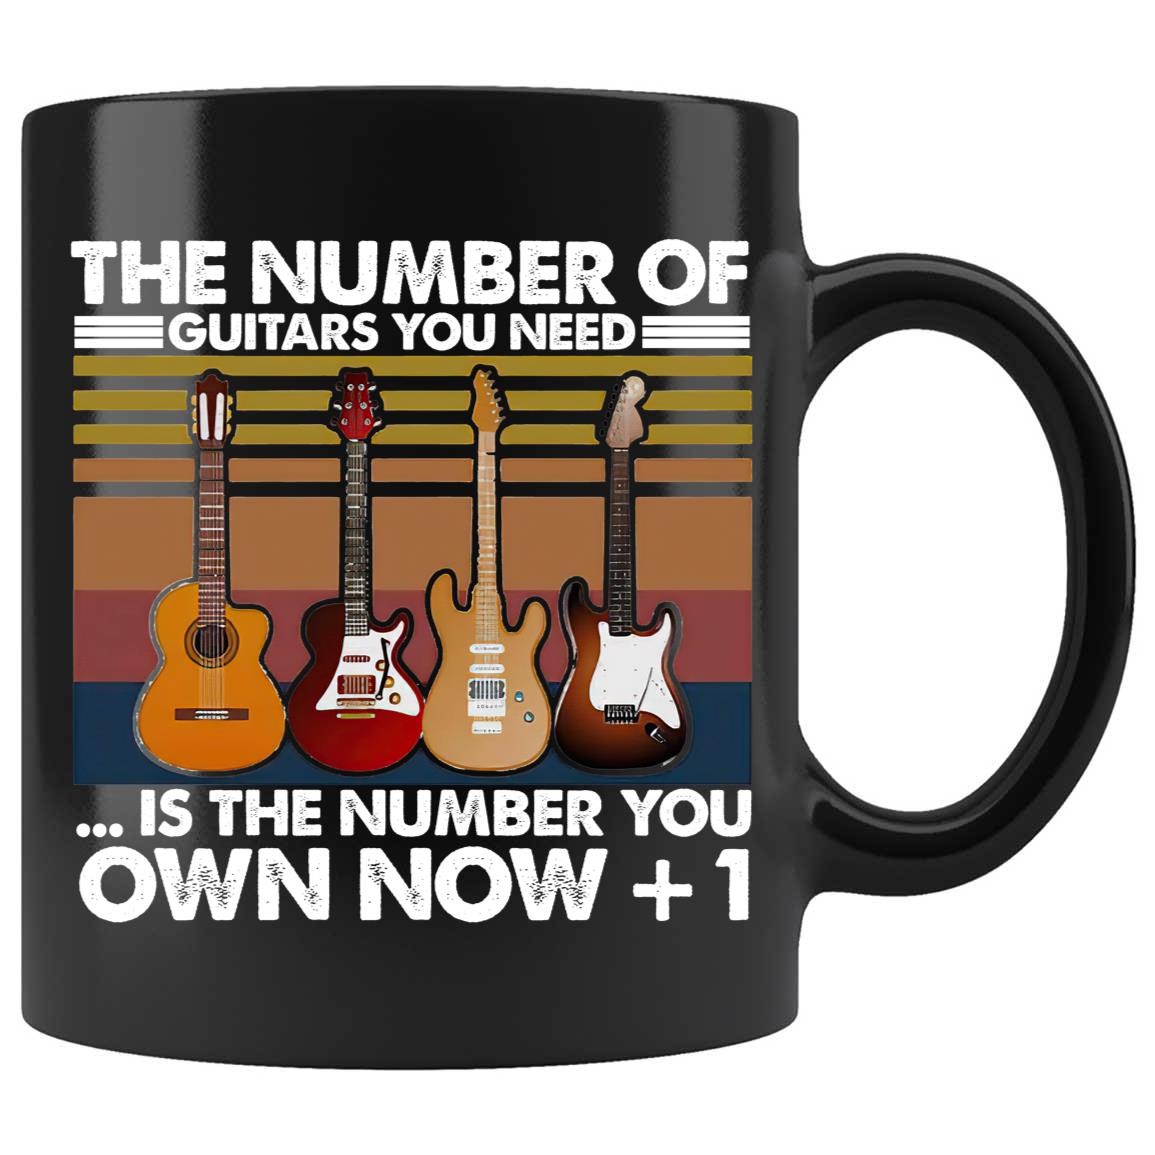 Skitongifts Coffee Mug Funny Ceramic Novelty Music Enthusiast - Inchthe Number Of Guitars You Need Is The Number You Own Now + 1 TsZIoZQ